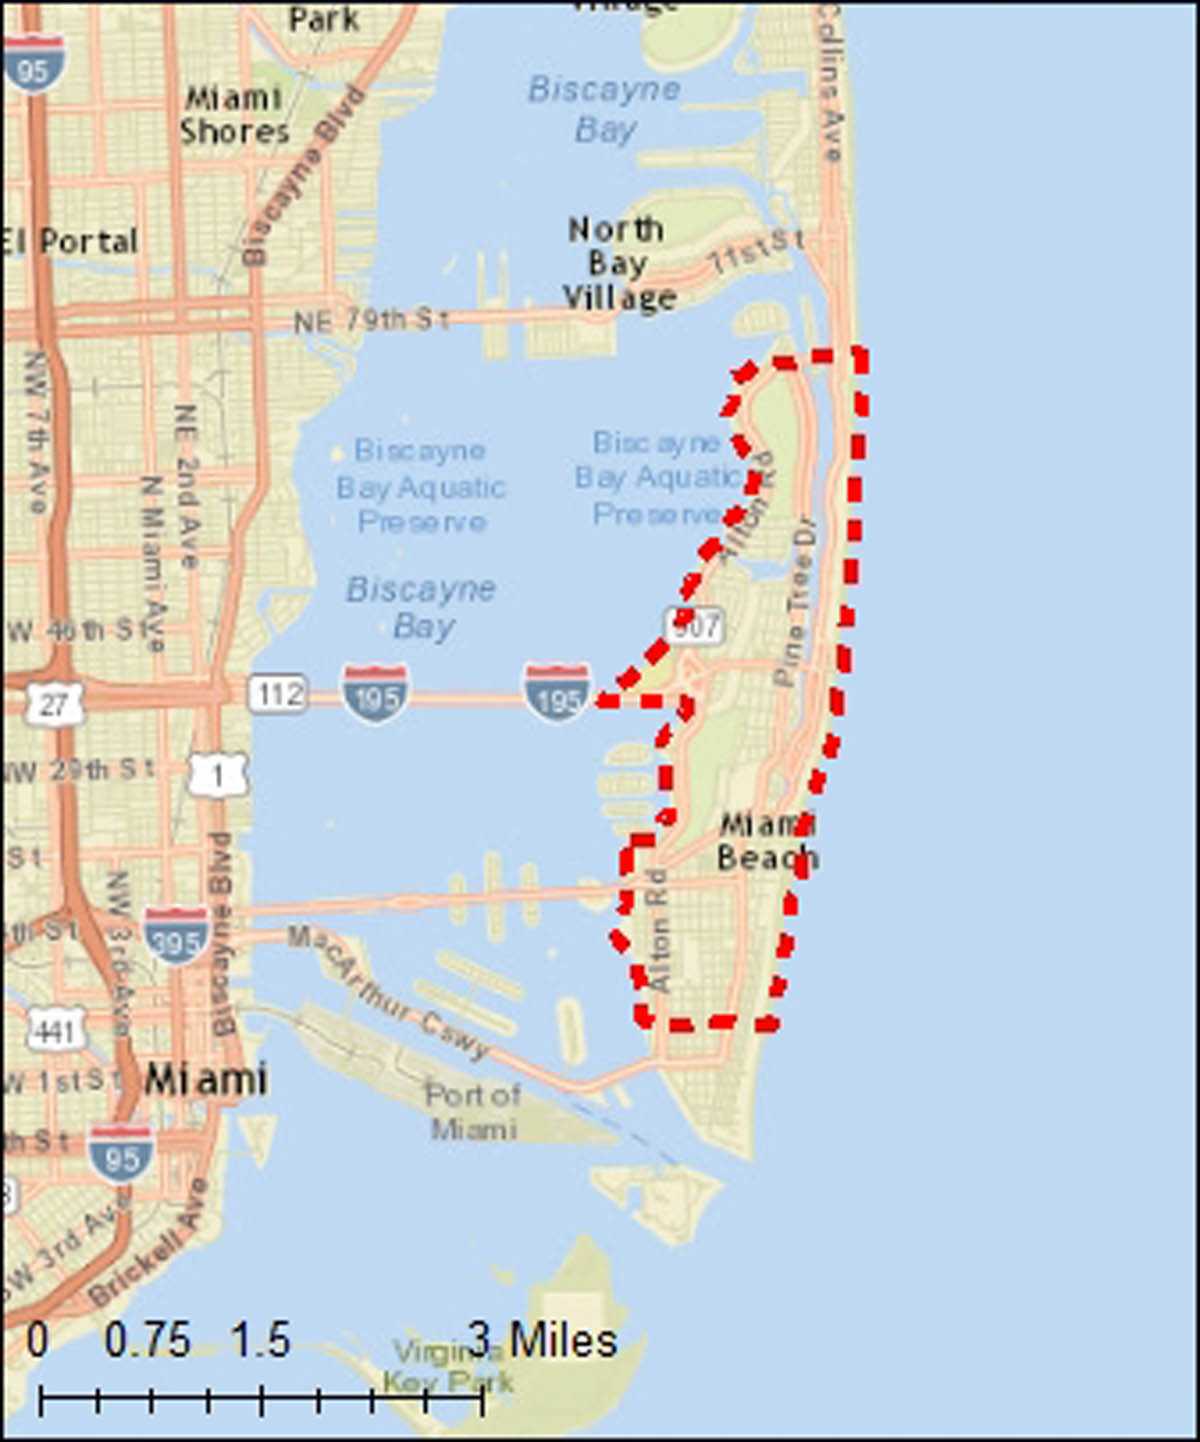 Map of Miami Beach where there is active Zika transmissions